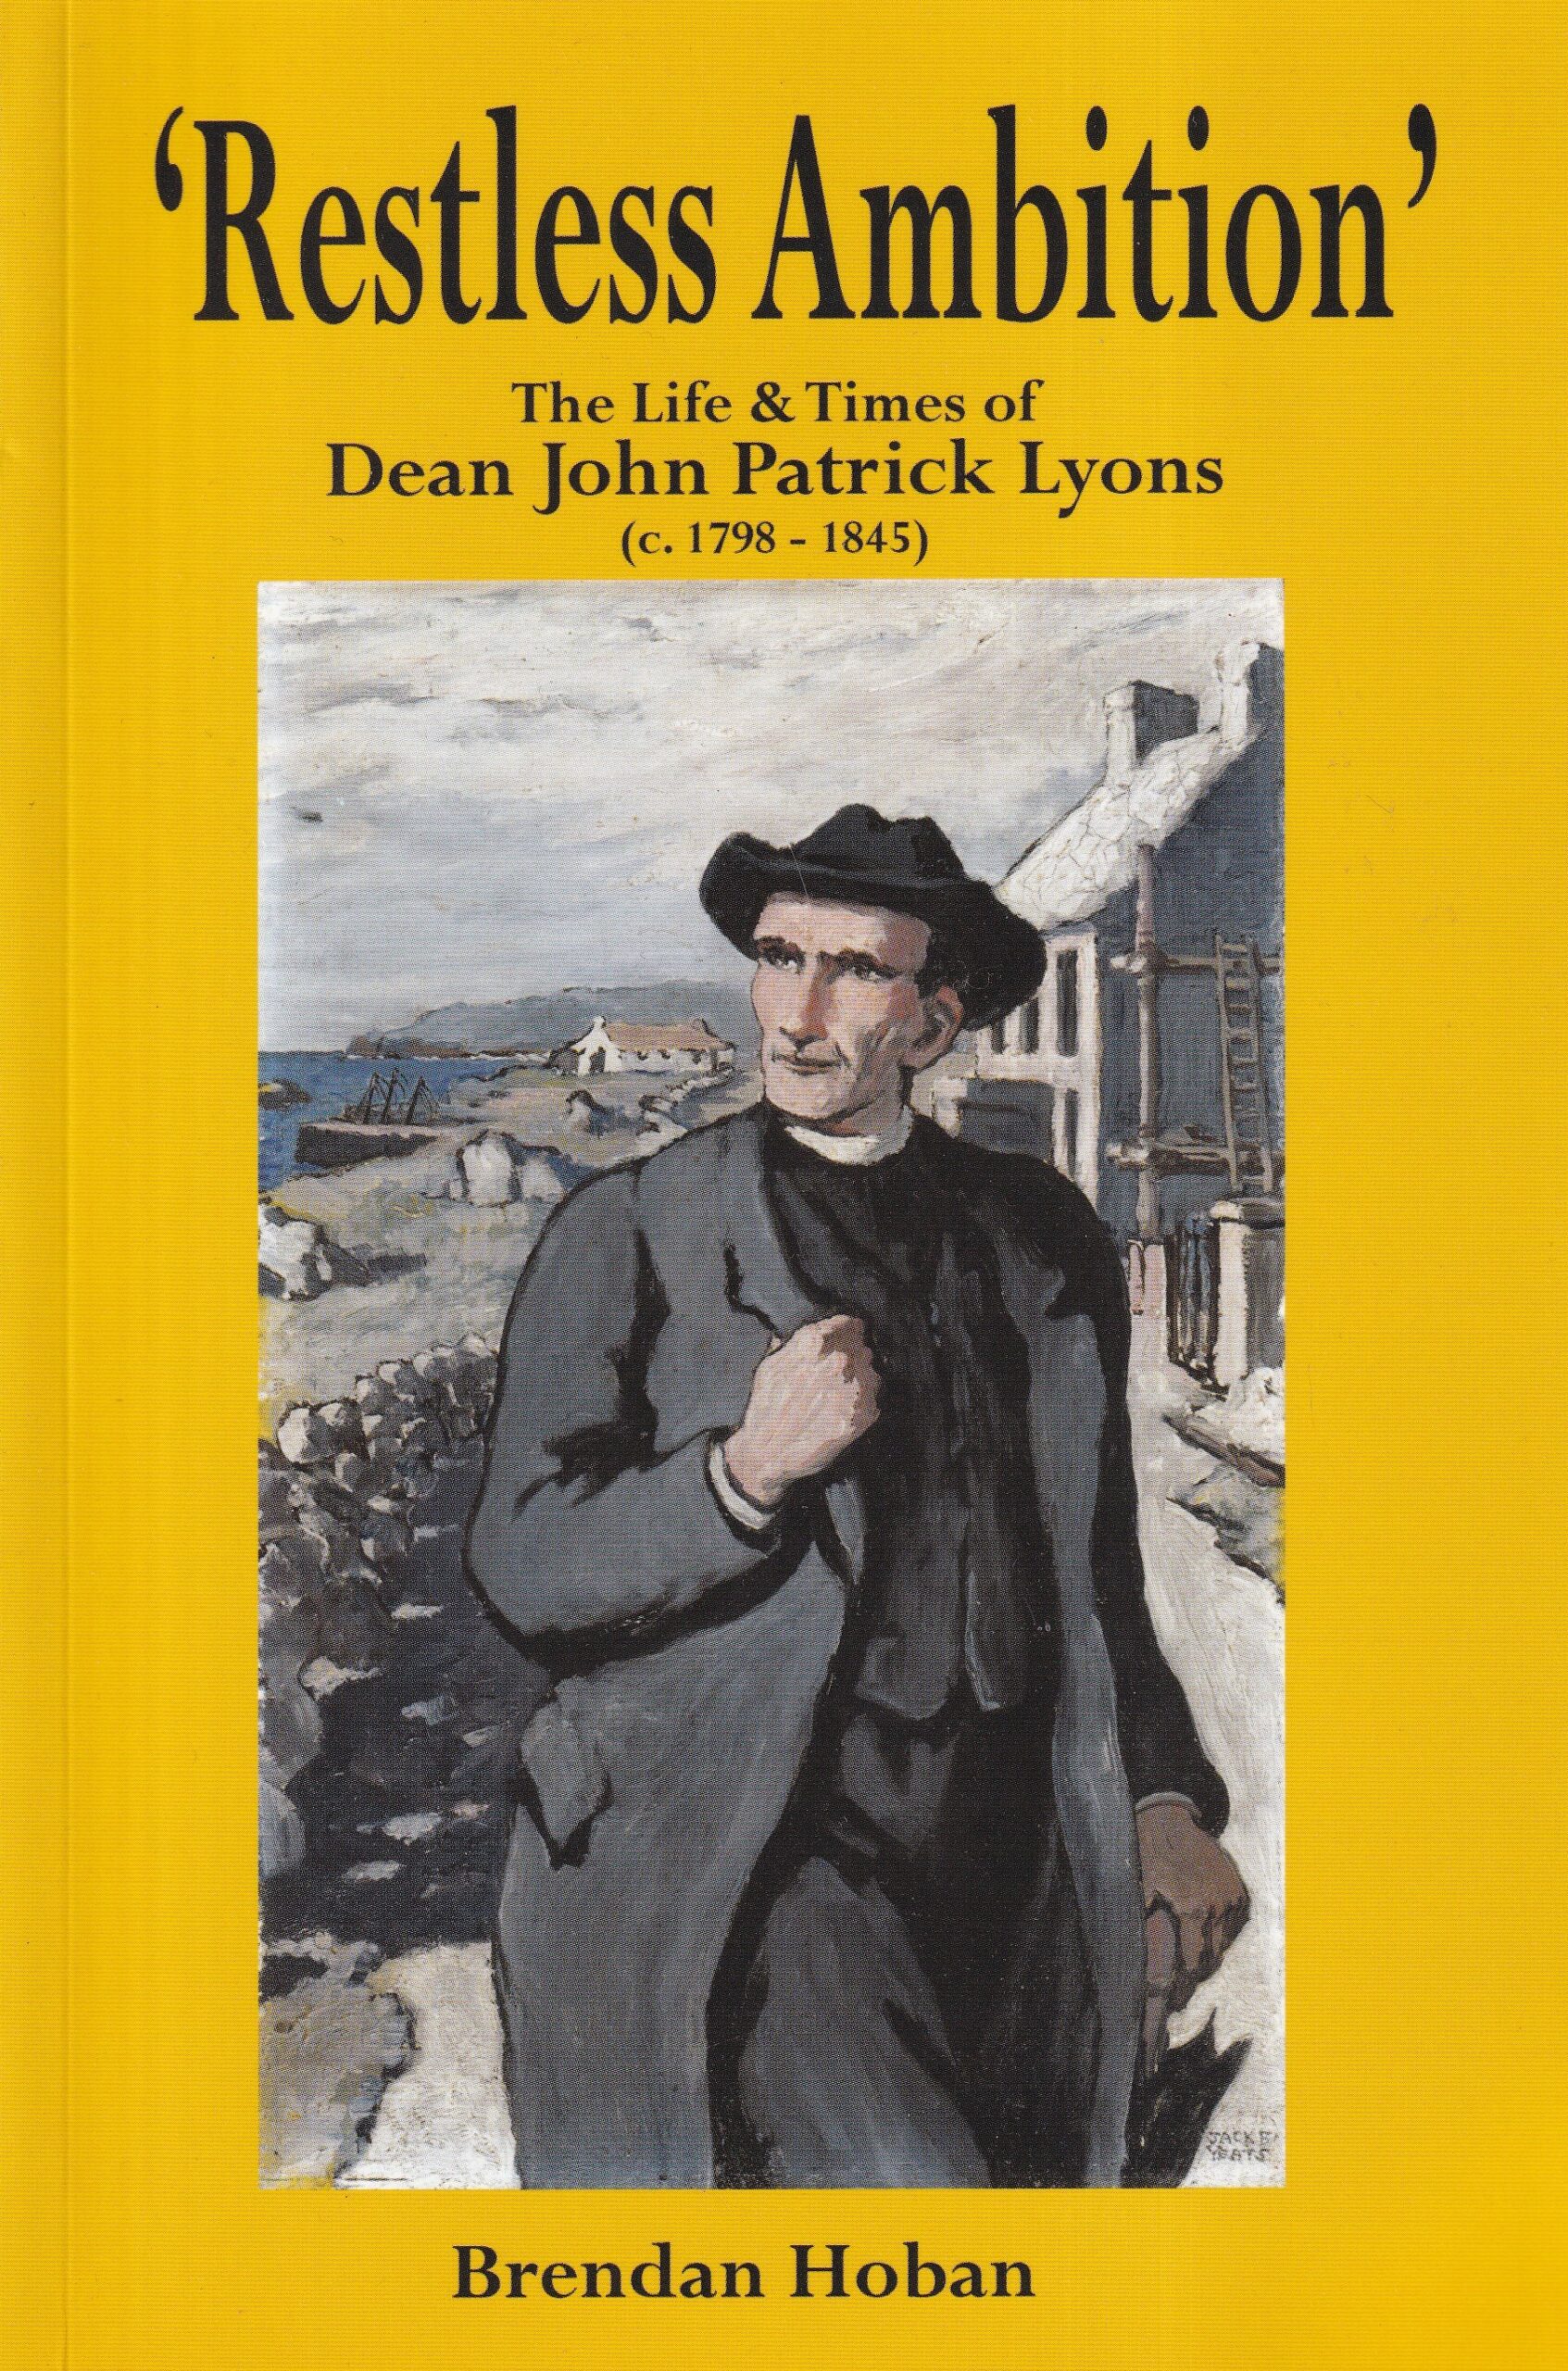 Restless Ambition: The Life and Times of Dean John Patrick Lyons (c.1798-1845)- Signed | Brendan Hoban | Charlie Byrne's